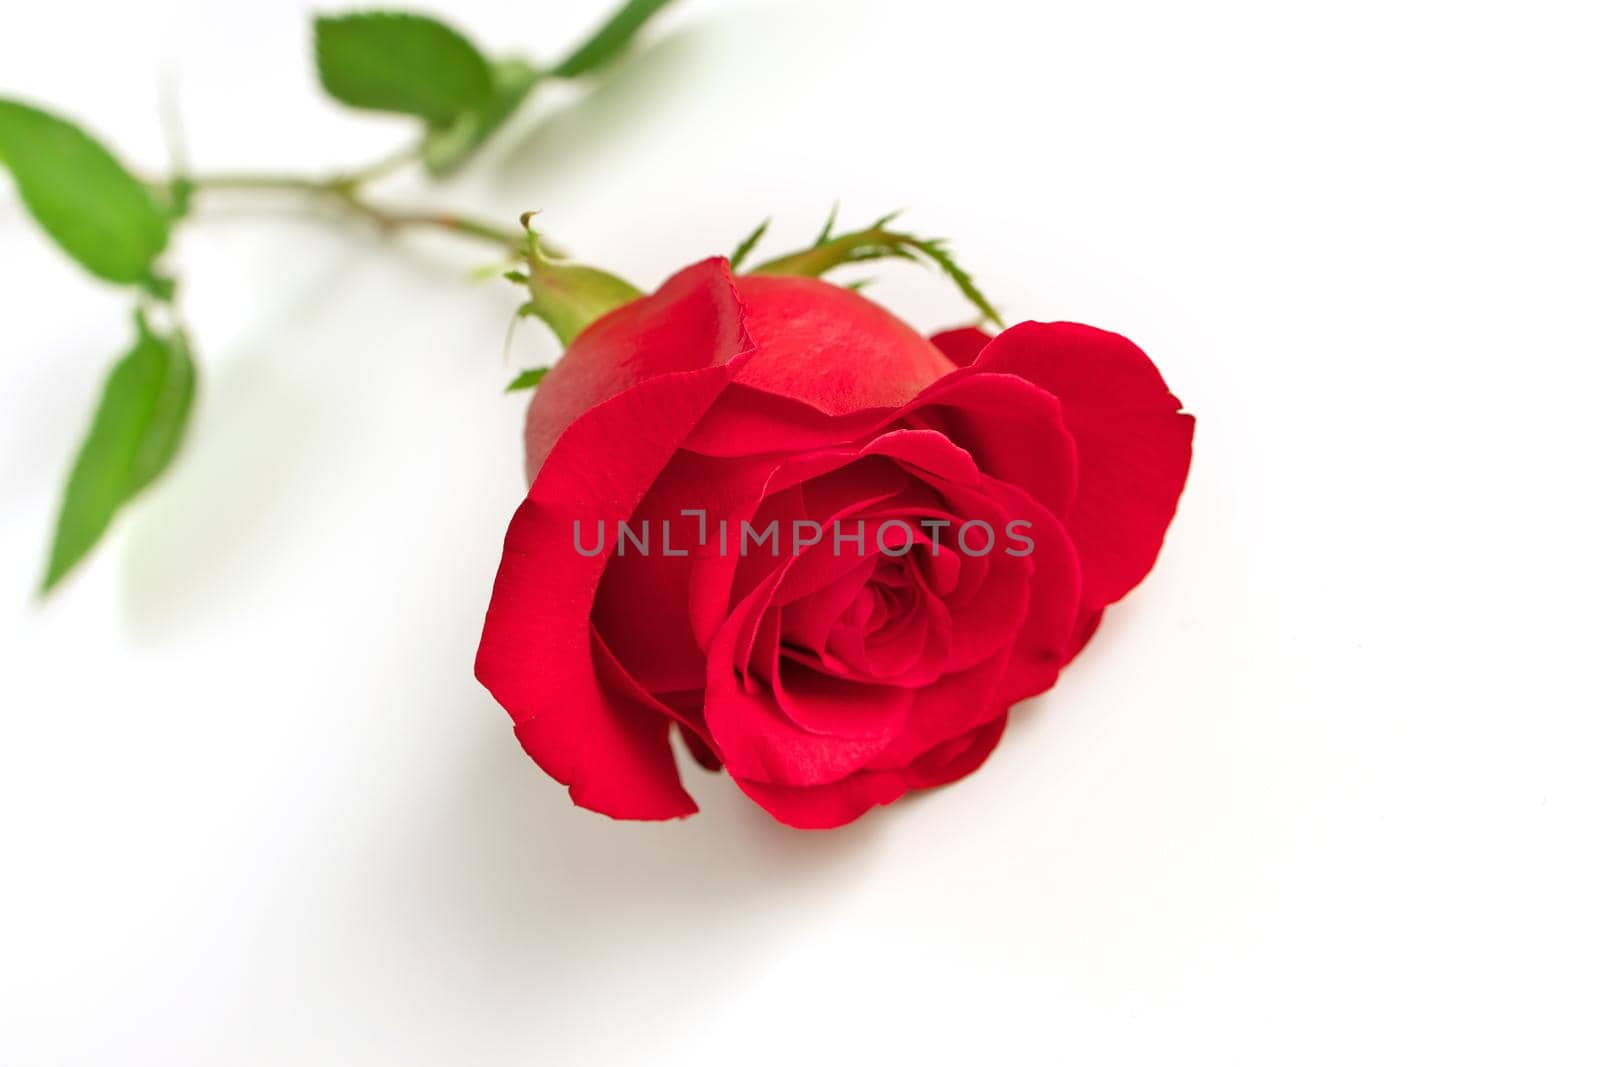 Low Angle View of a Single Red Rose Isolated on a White Background by markvandam